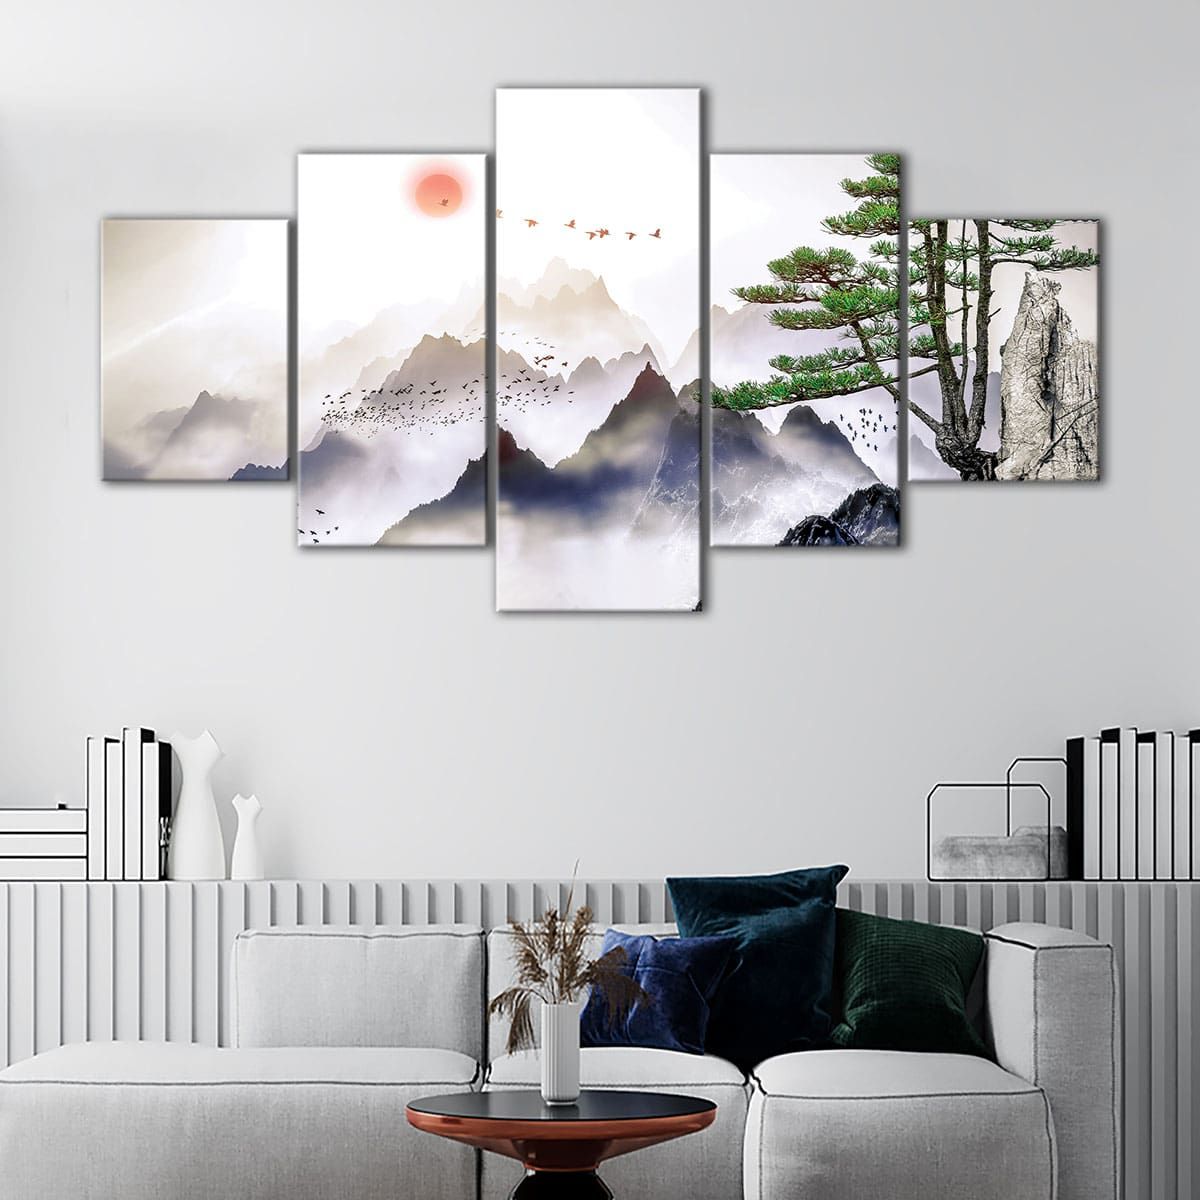 Chinese Mountain Fog Canvas Wall Art | Nature Print – Canvas Art Bay With Mountains In The Fog Wall Art (View 12 of 15)